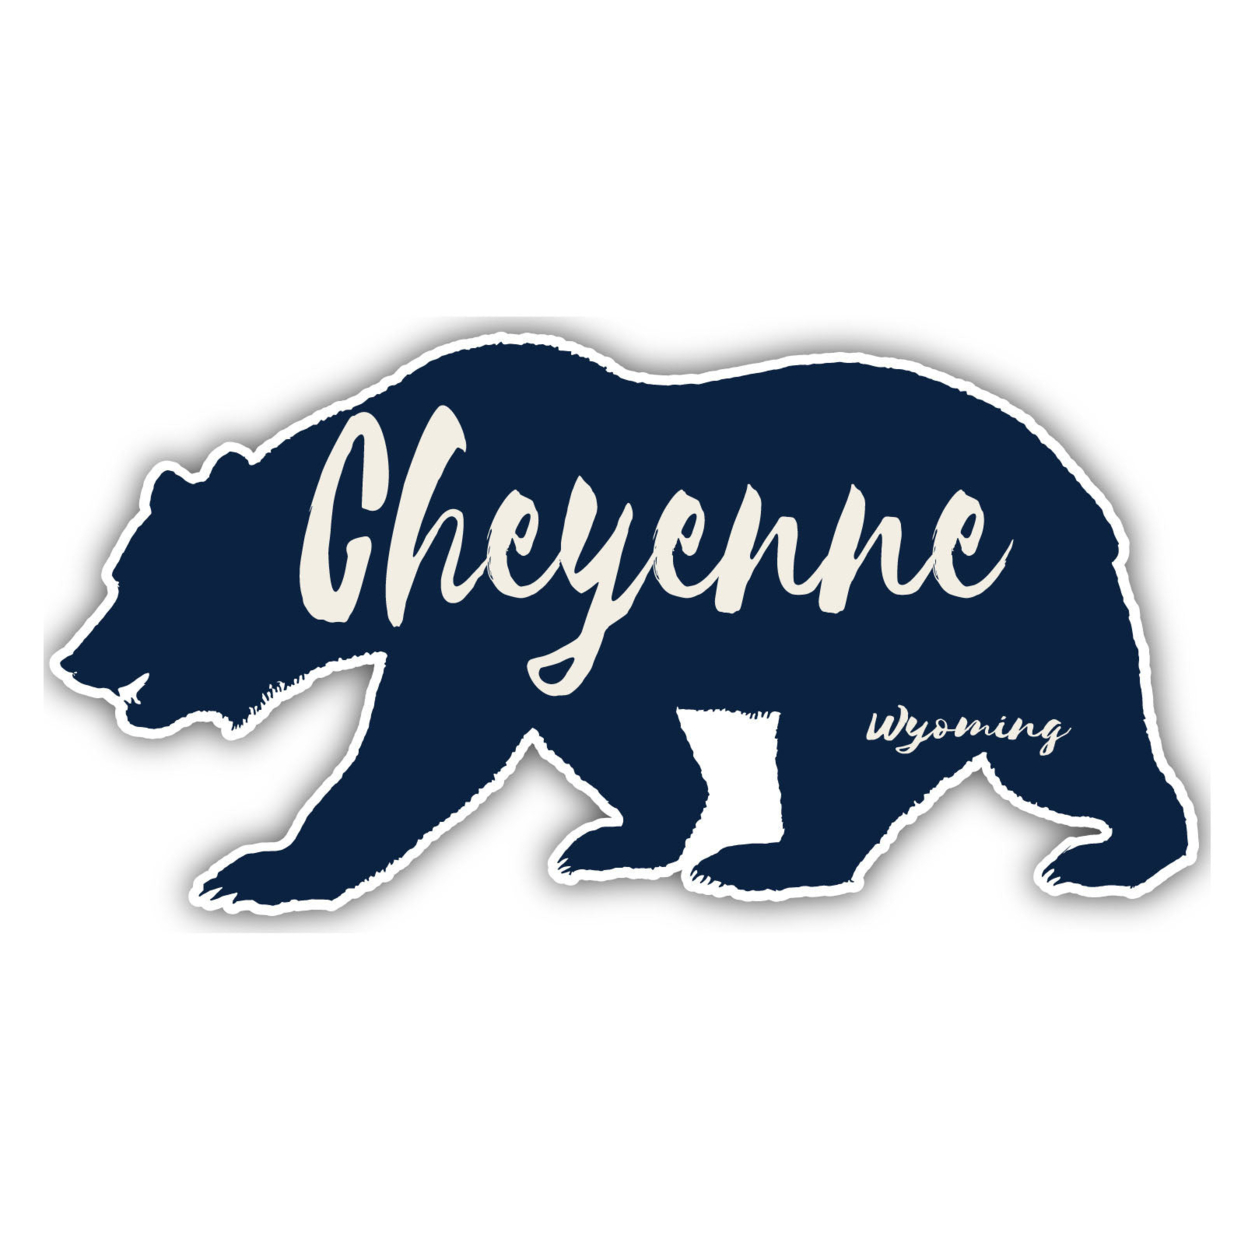 Cheyenne Wyoming Souvenir Decorative Stickers (Choose Theme And Size) - 4-Pack, 6-Inch, Bear